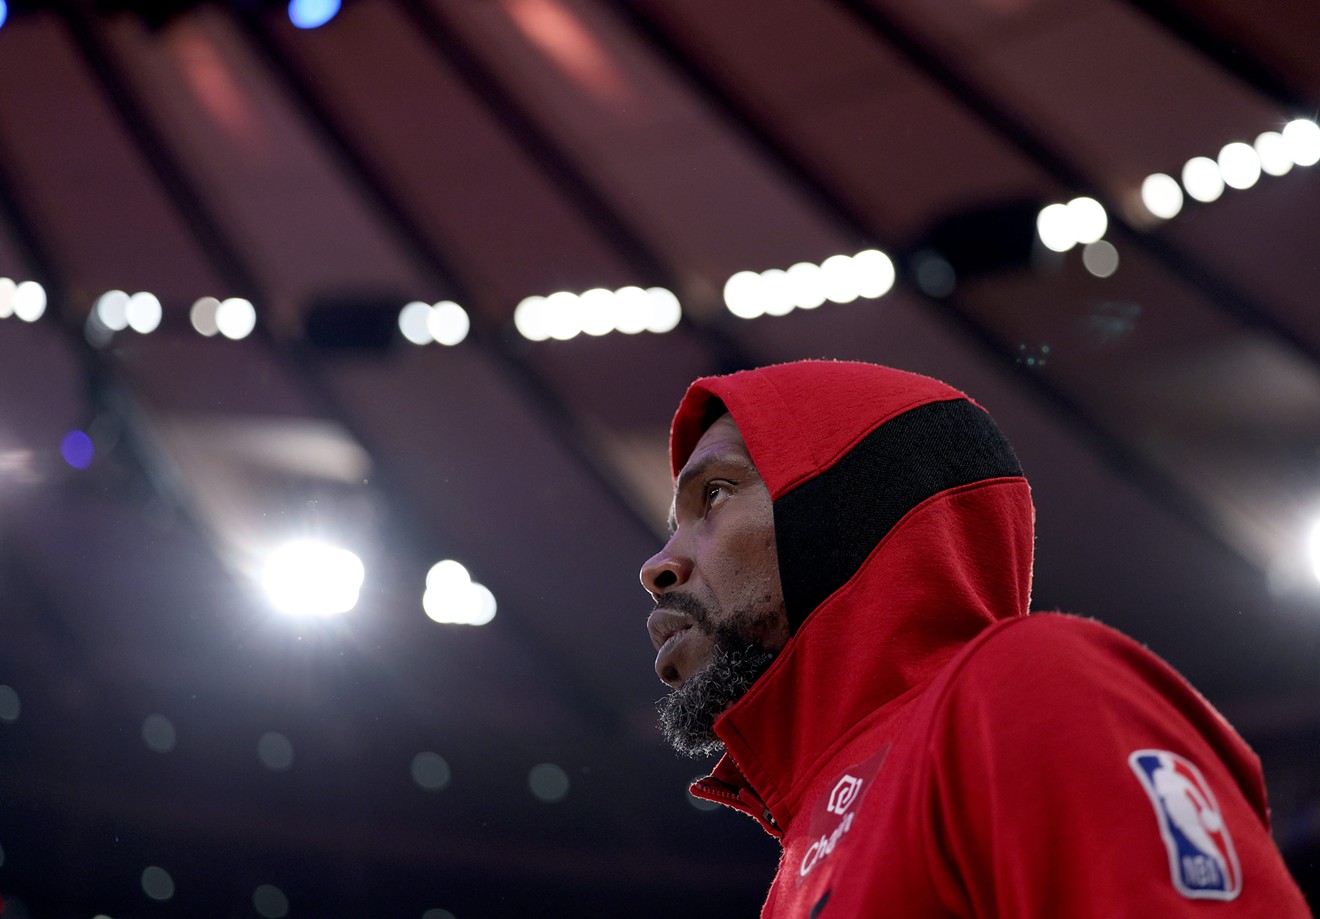 Udonis Haslem looks on during the Eastern Conference Semifinals at Madison Square Garden against the New York Knicks on April 30, 2023.